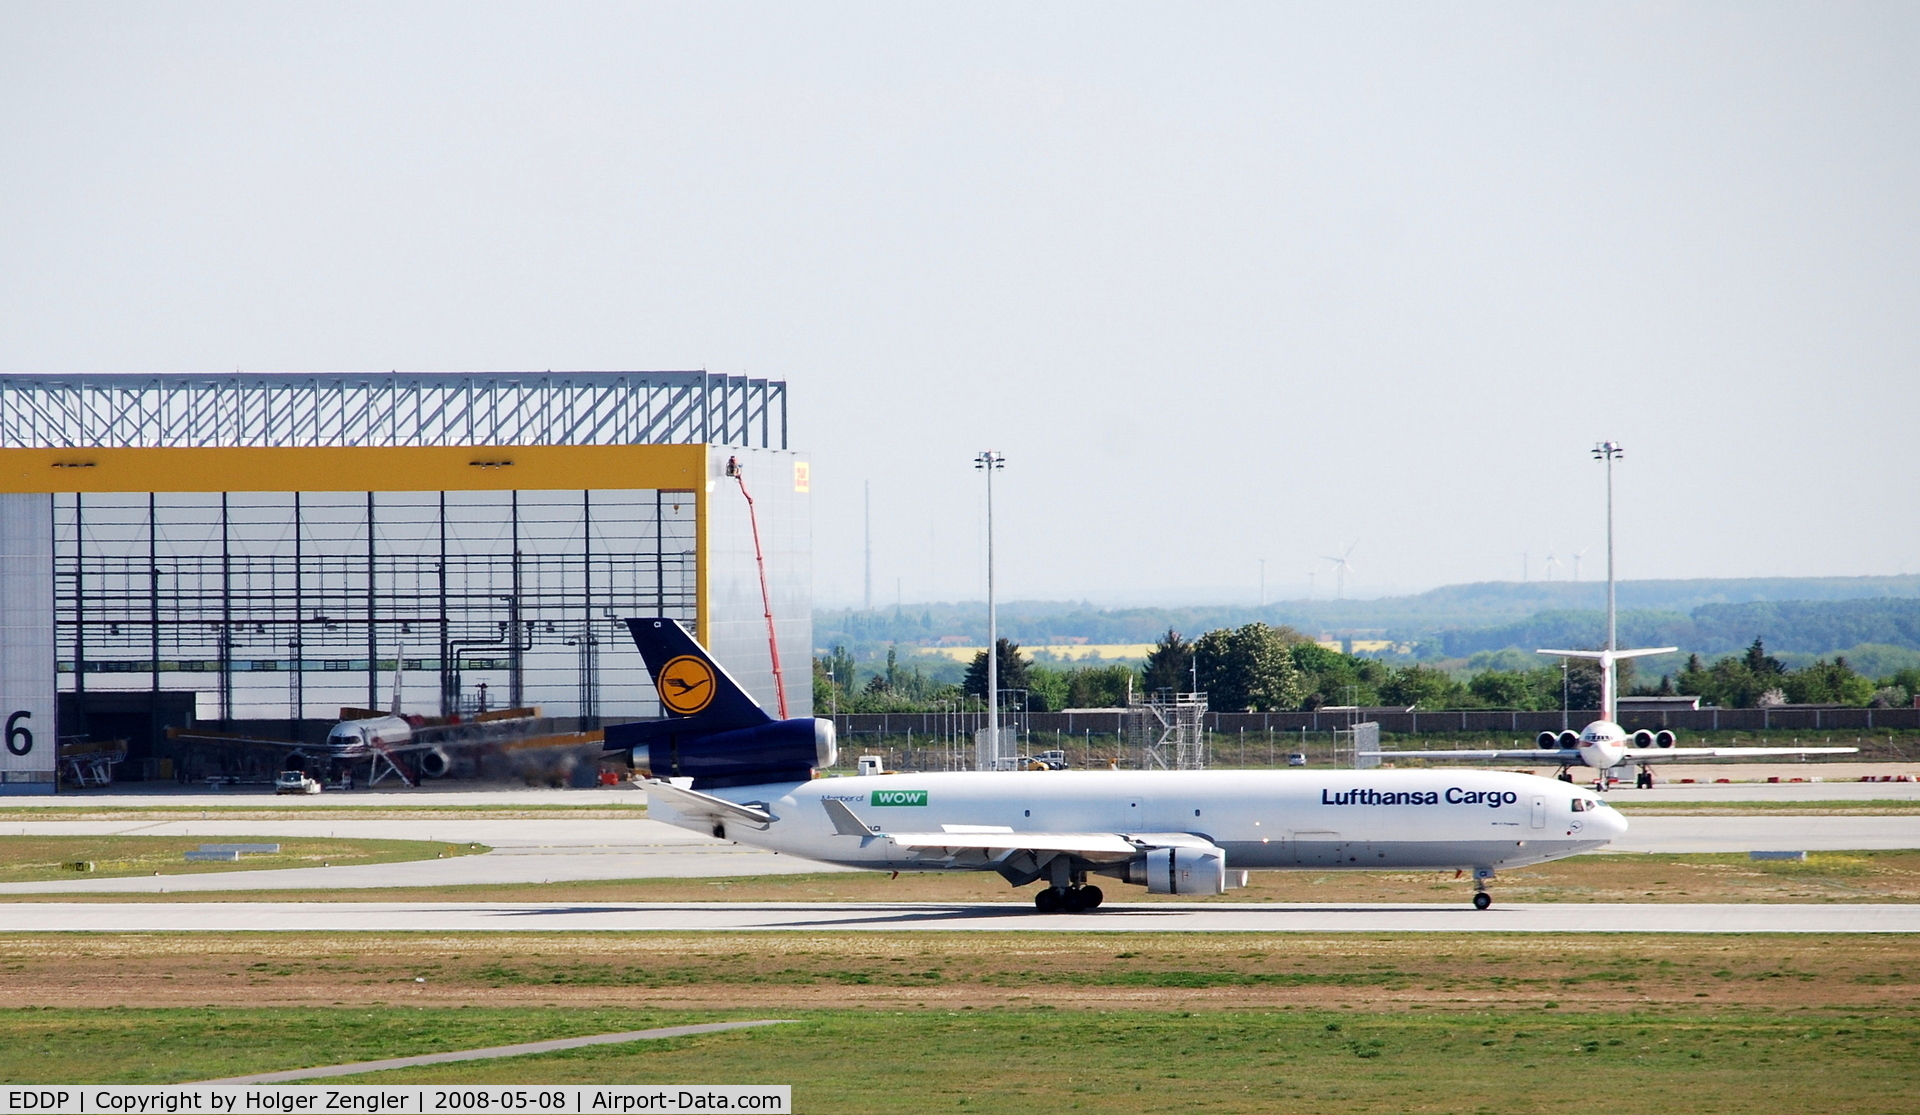 Leipzig/Halle Airport, Leipzig/Halle Germany (EDDP) - View to DHL aircraft hangar and freighter runway